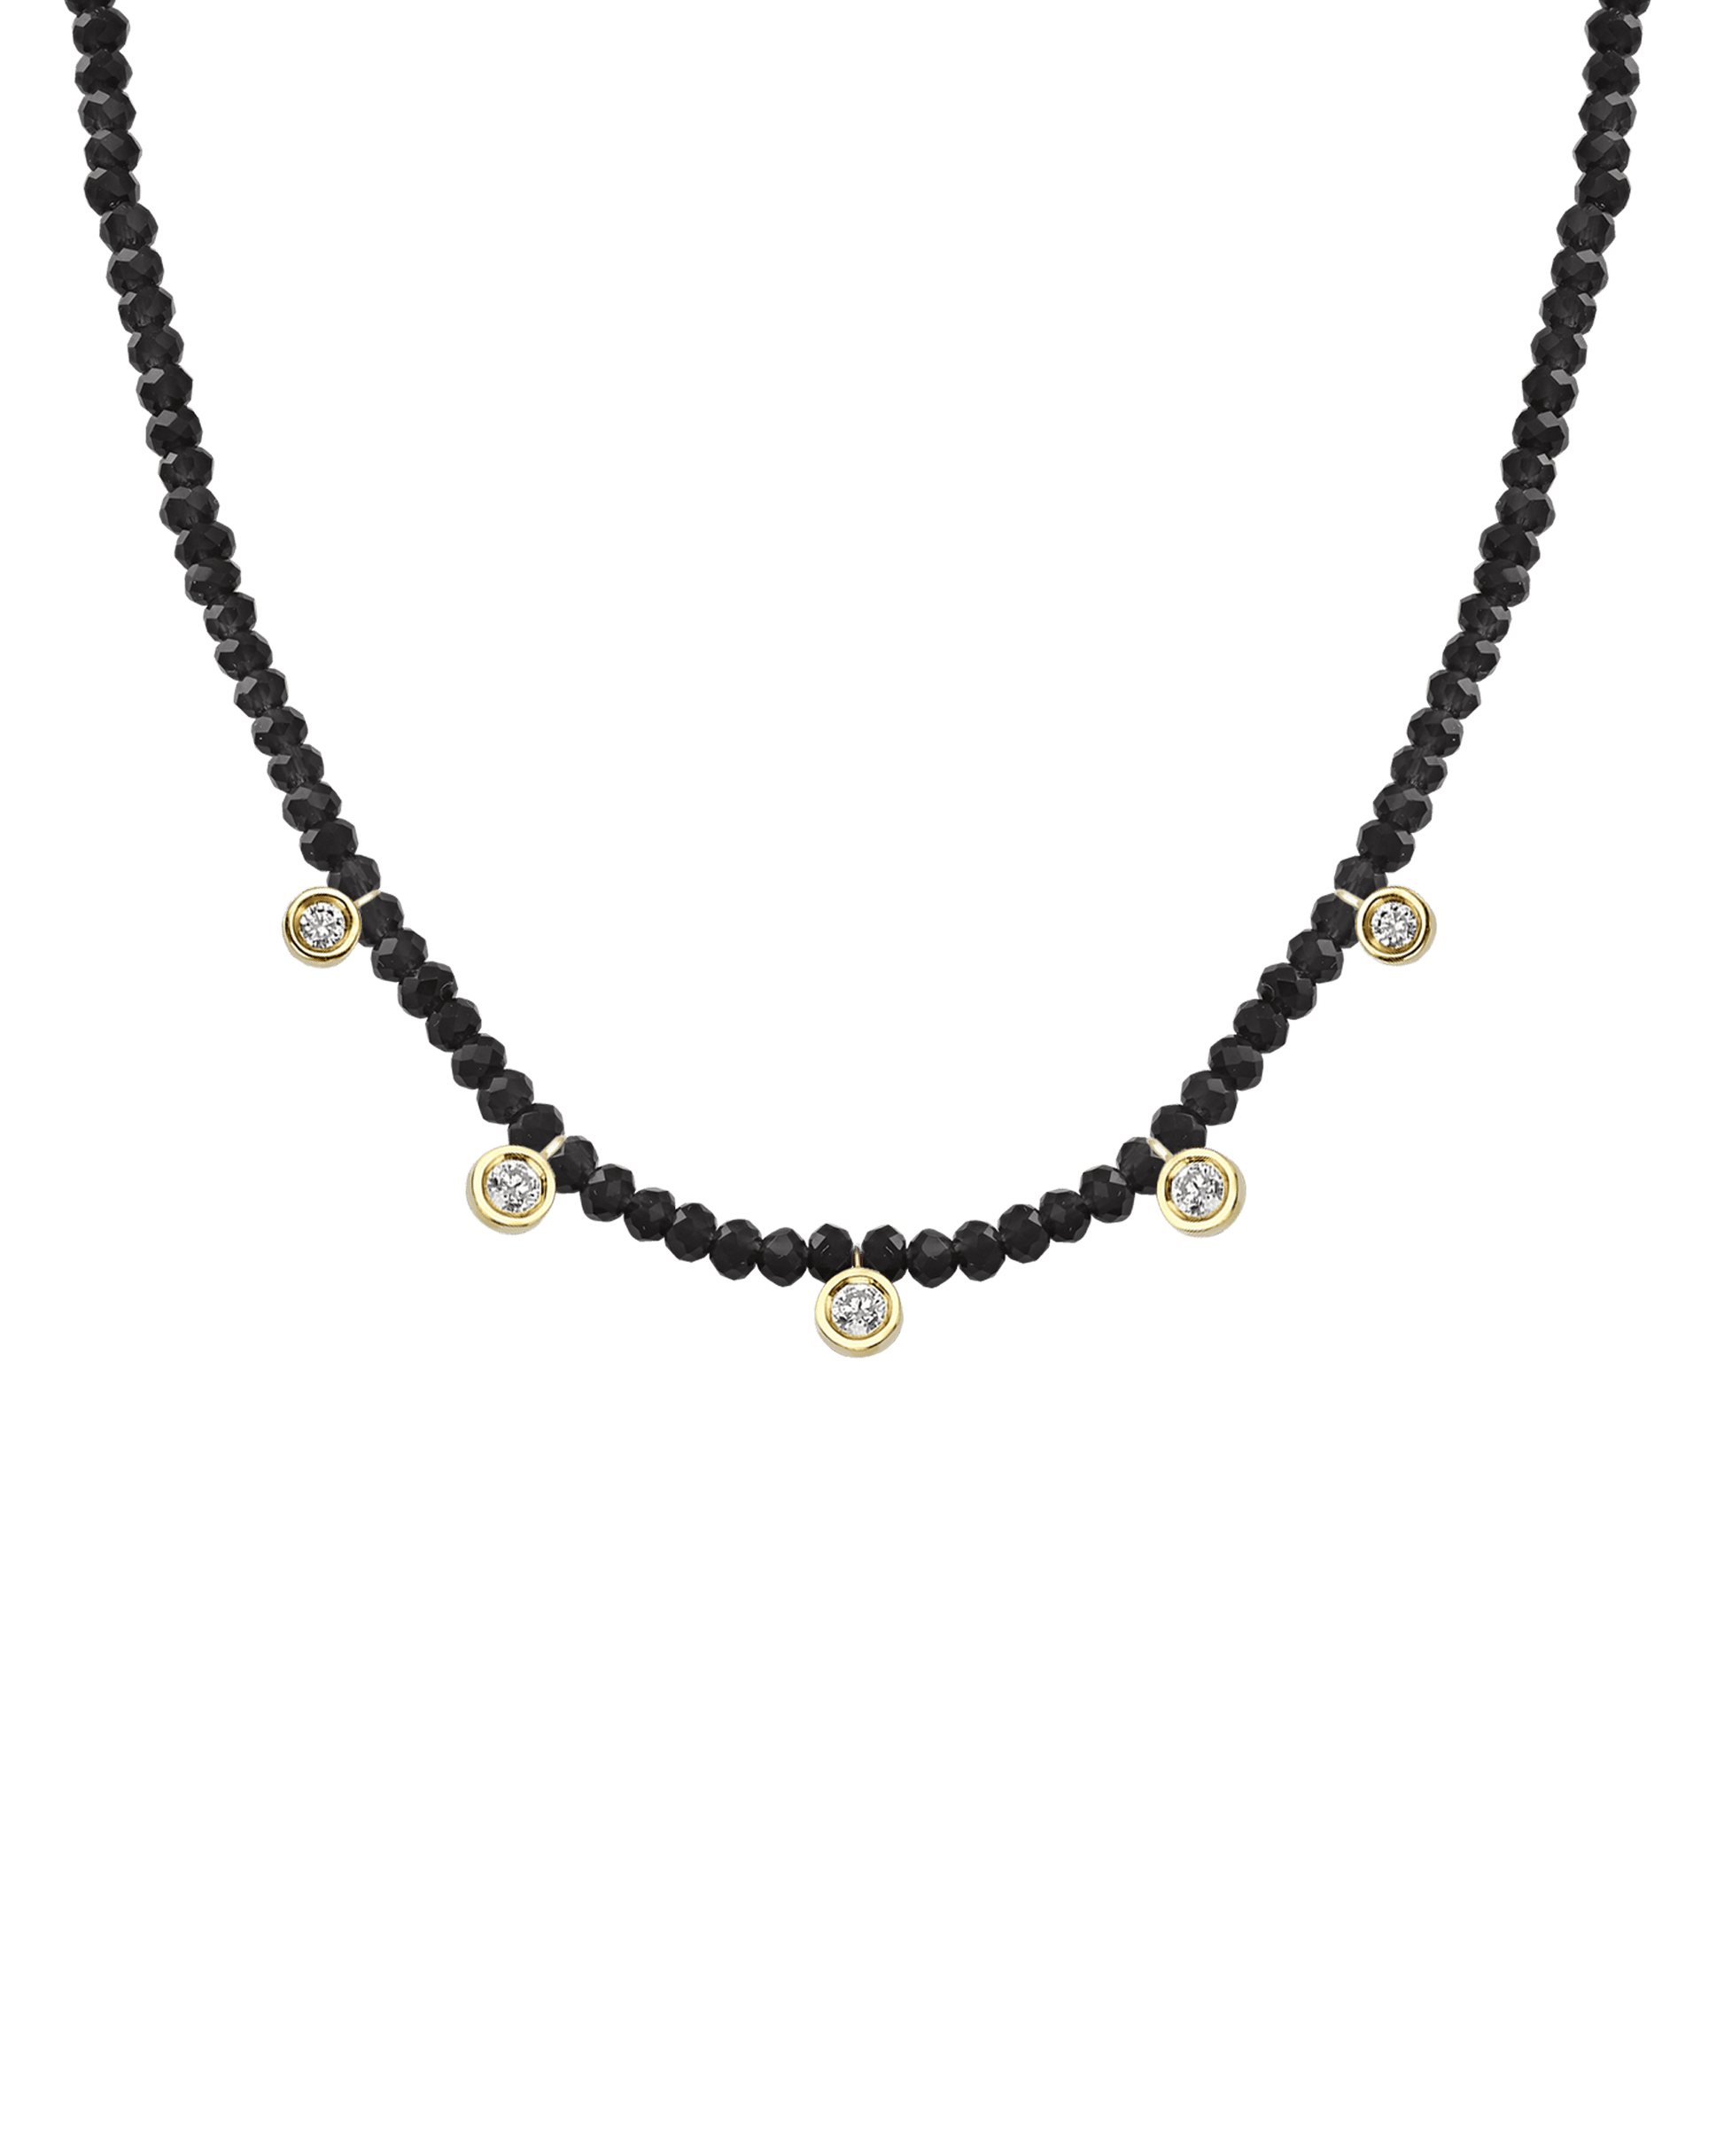 Black Spinel Gemstone & Five diamonds Necklace - 14K Yellow Gold Necklaces magal-dev Glass Beads Black Spinnel 14" - Collar 